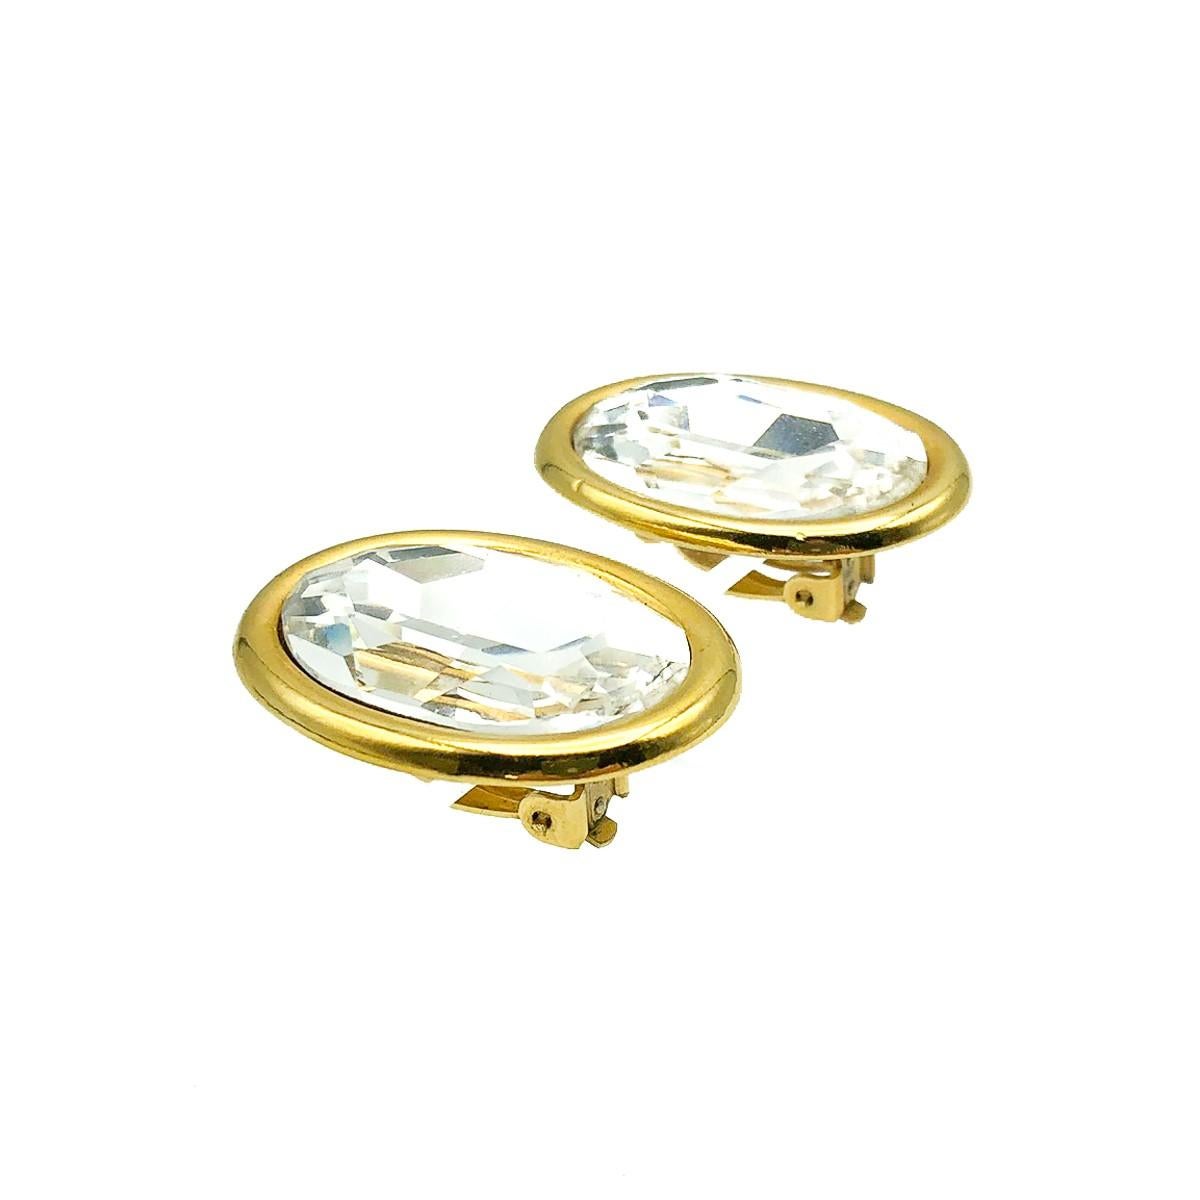 A superb pair of oversized vintage oval headlamp earrings. Featuring a stunning glass oval crystal set within a simple galleried gold rim setting for a beautiful contrast and finish. 
Condition: Very good without damage or noteworthy wear.